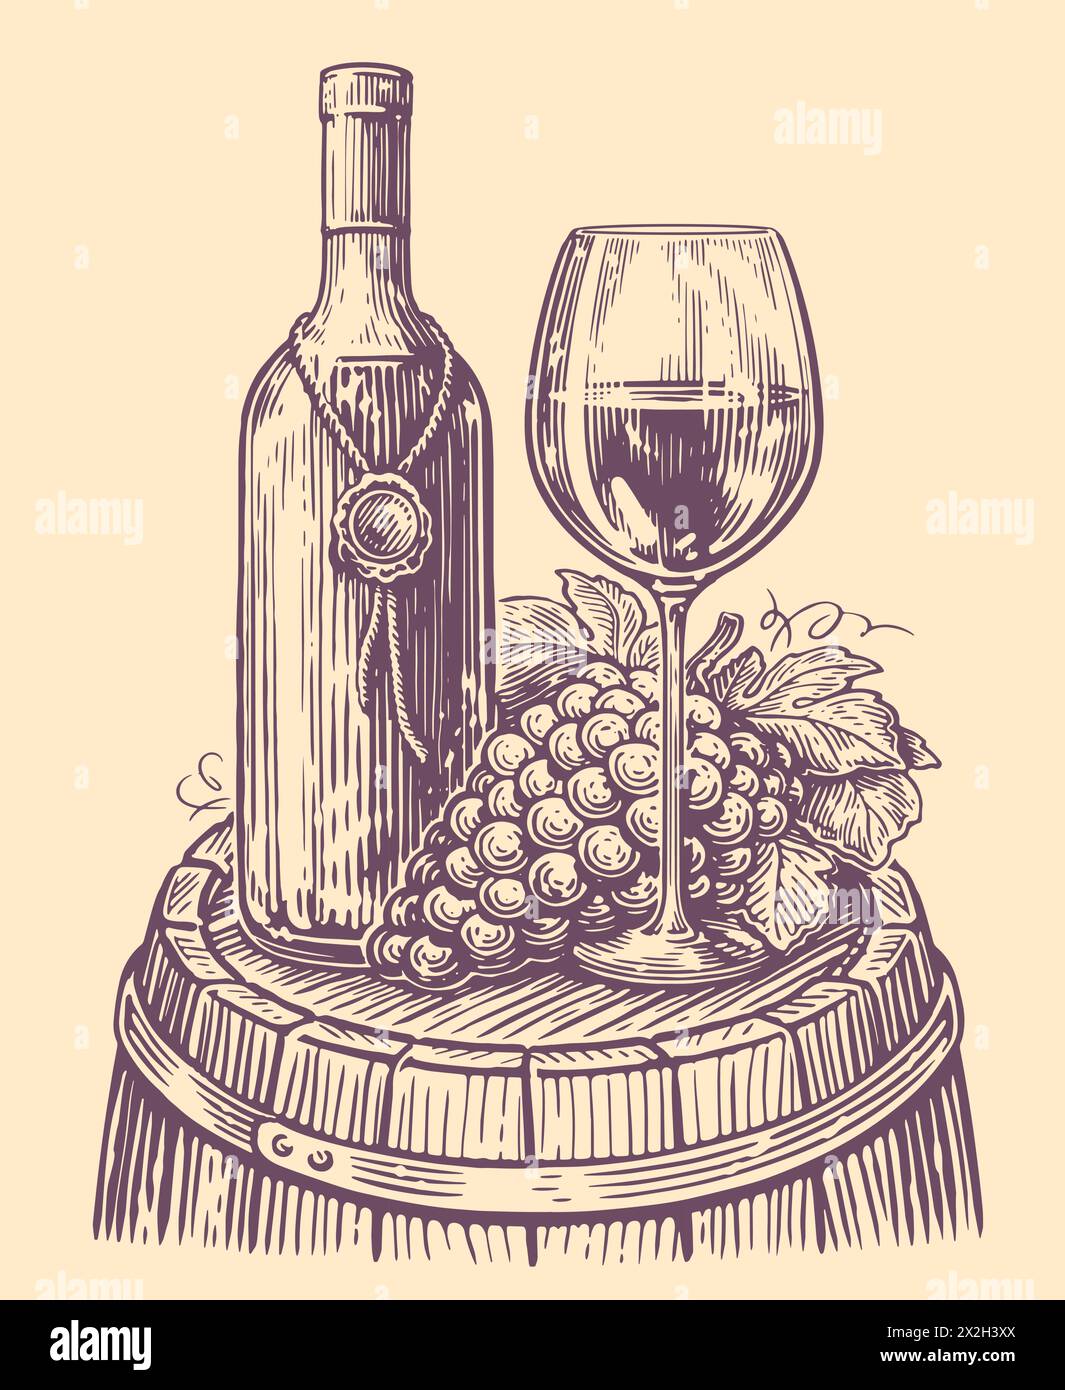 Bottle of wine with wine glass and grapes. Winery sketch. Vector illustration vintage engraving style Stock Vector